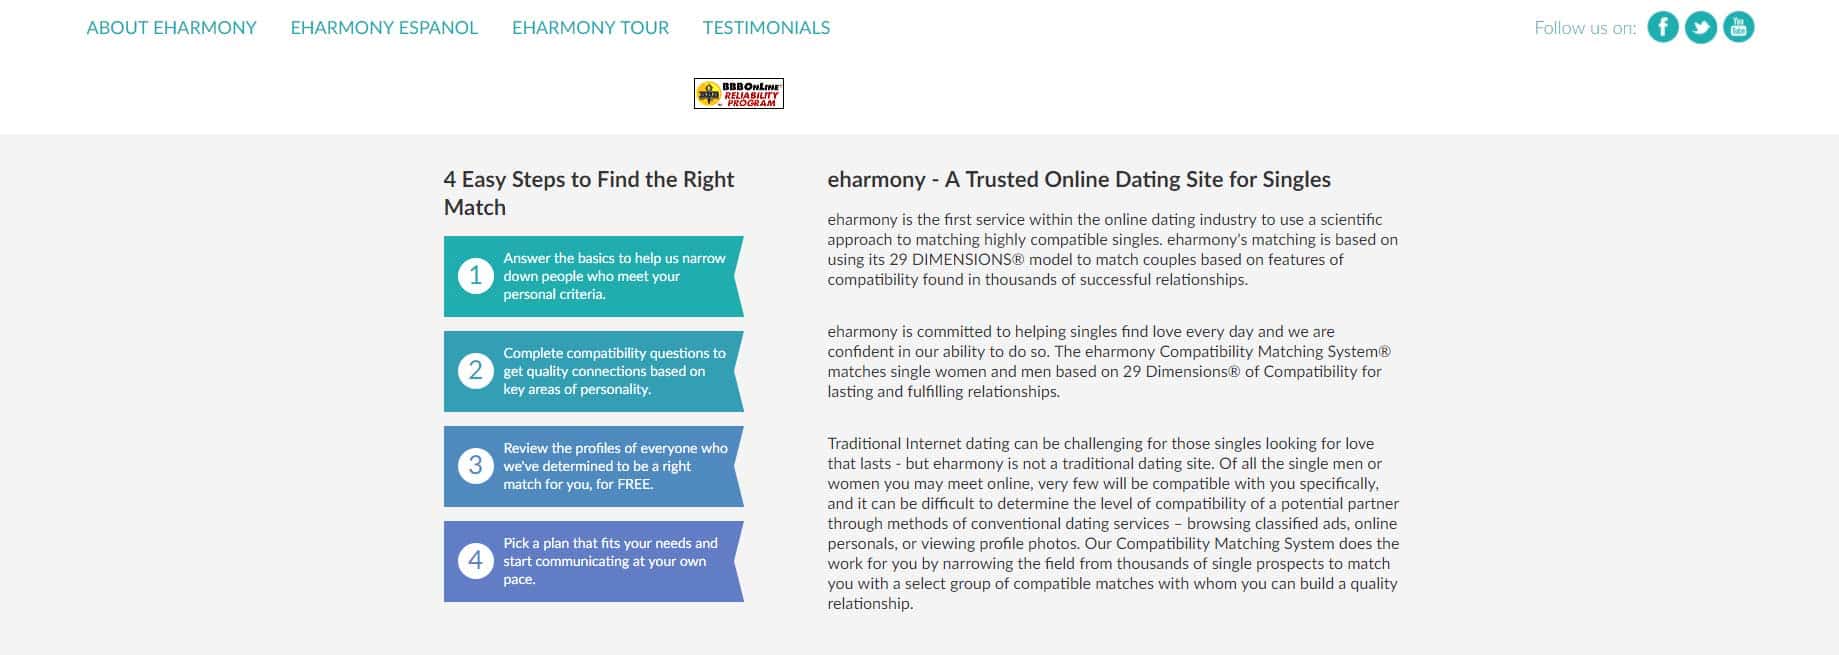 About eHarmony page image for international dating site review